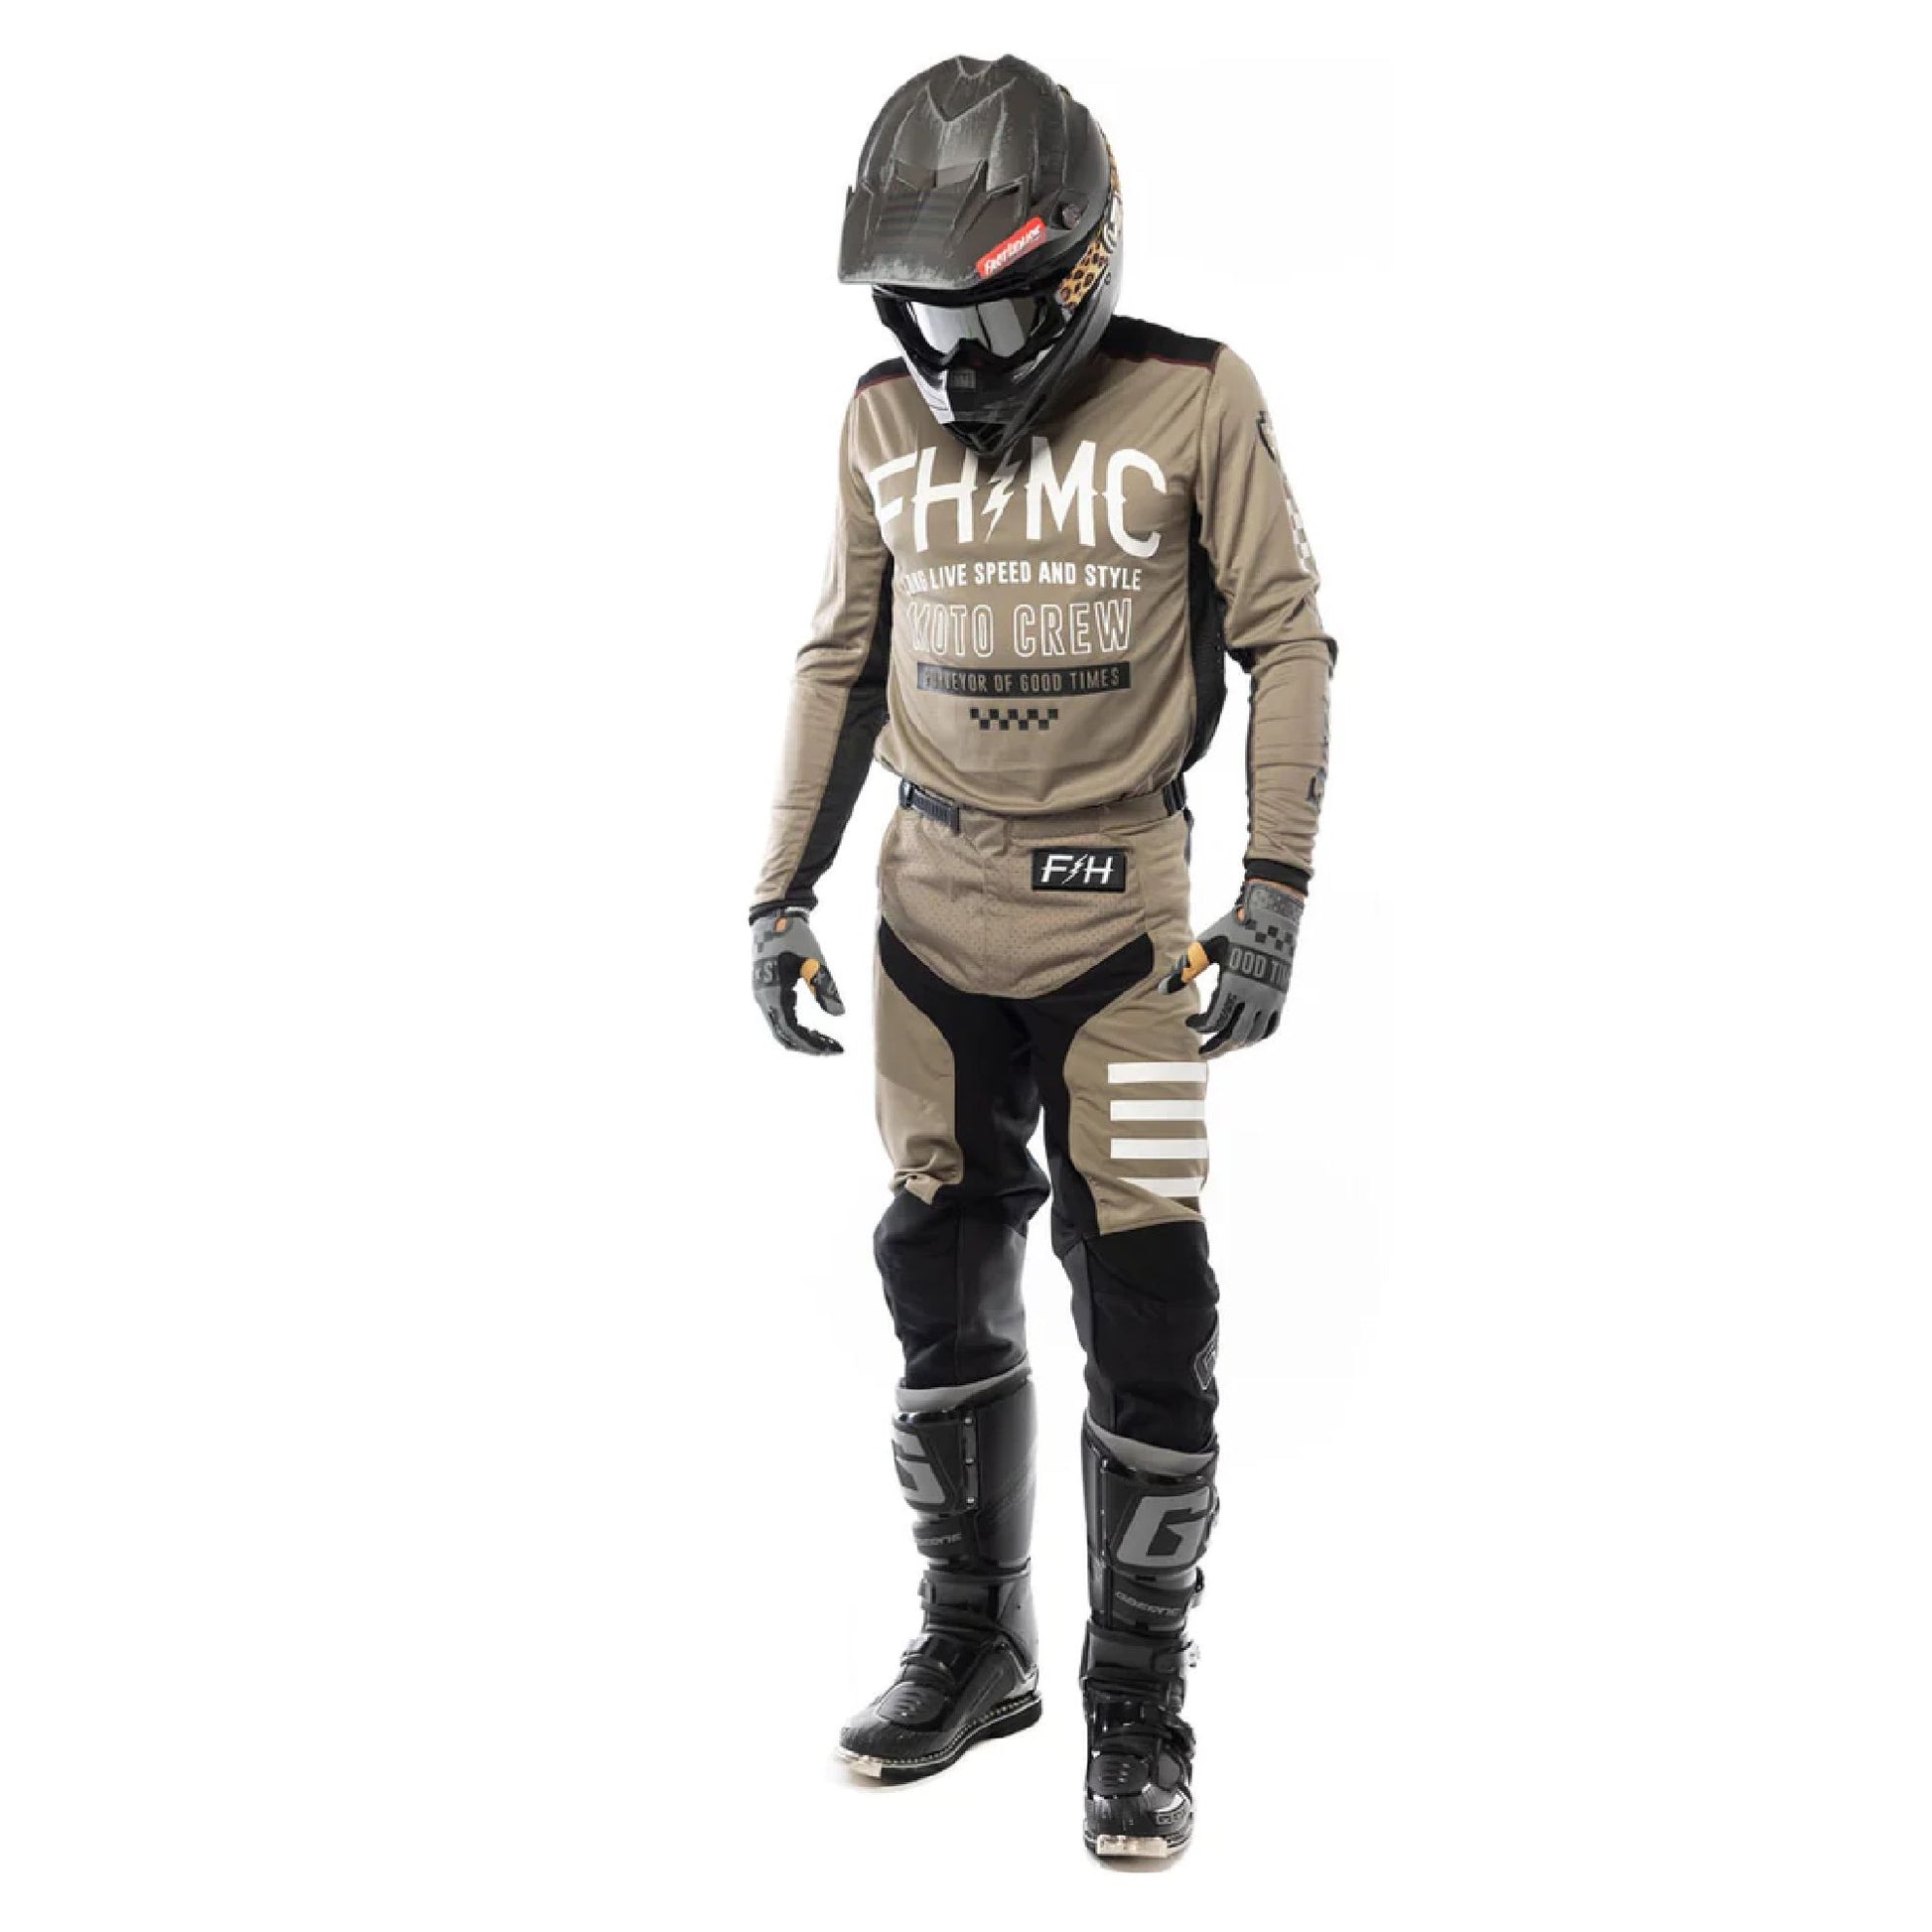 Fasthouse Speed Style Pant Moss Black Bike Pants